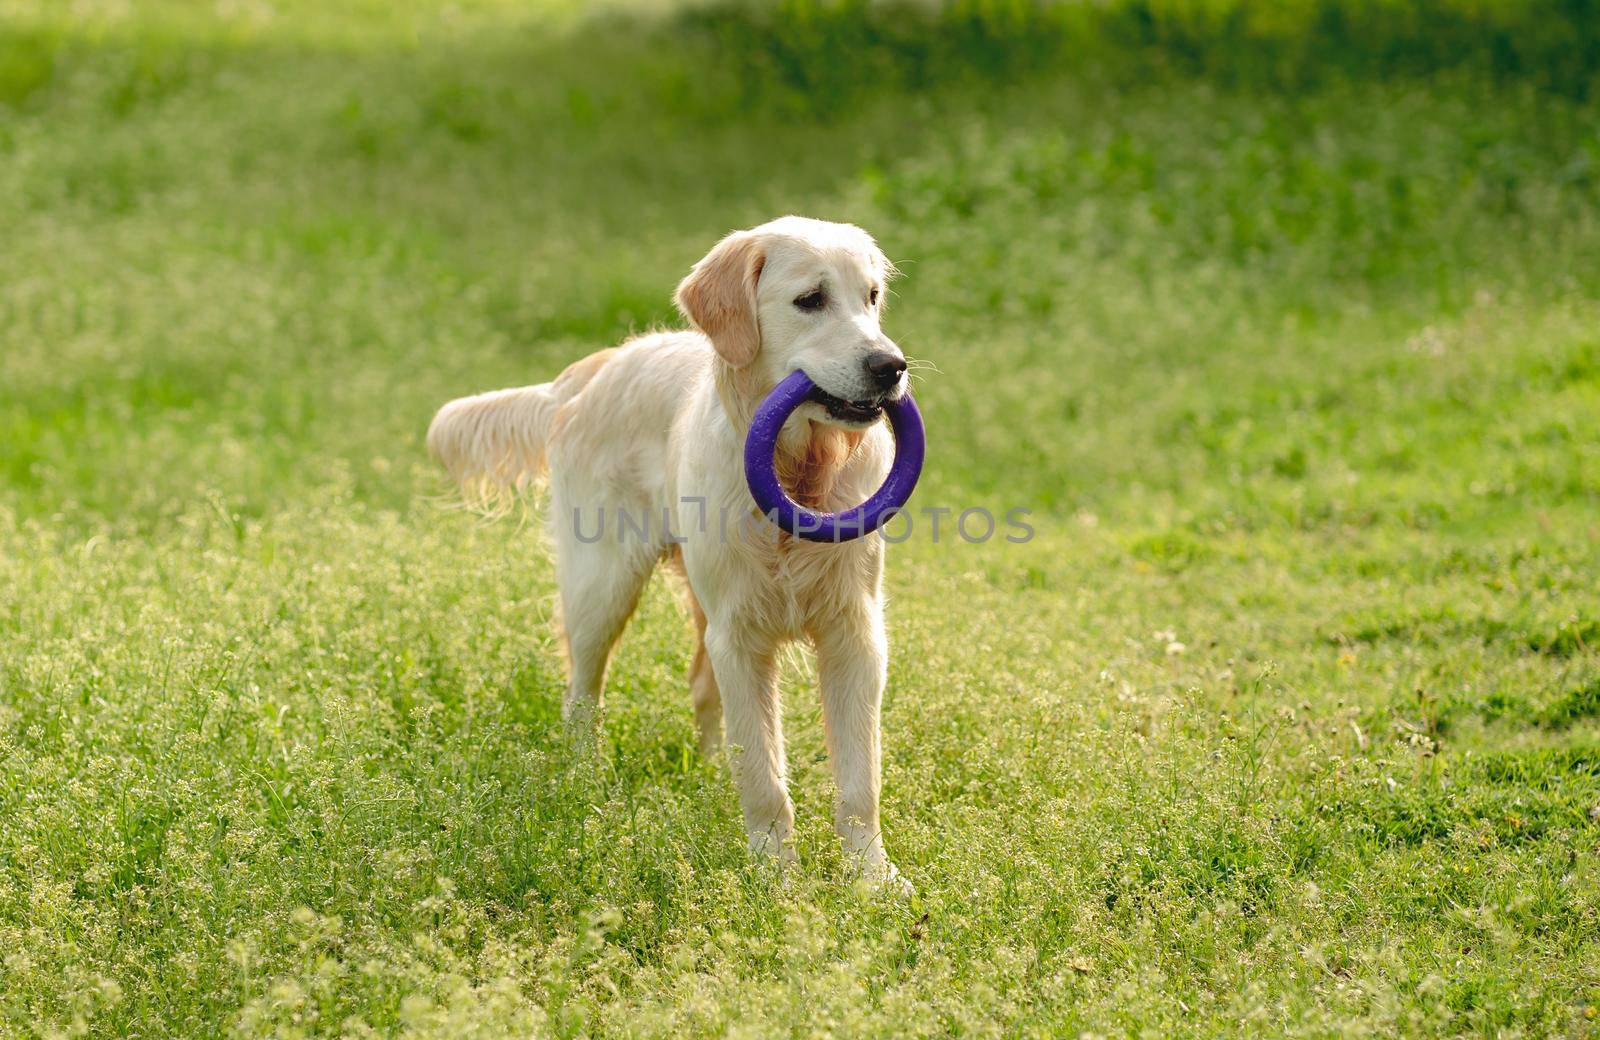 Playful dog with toy ring walking outside on blooming field